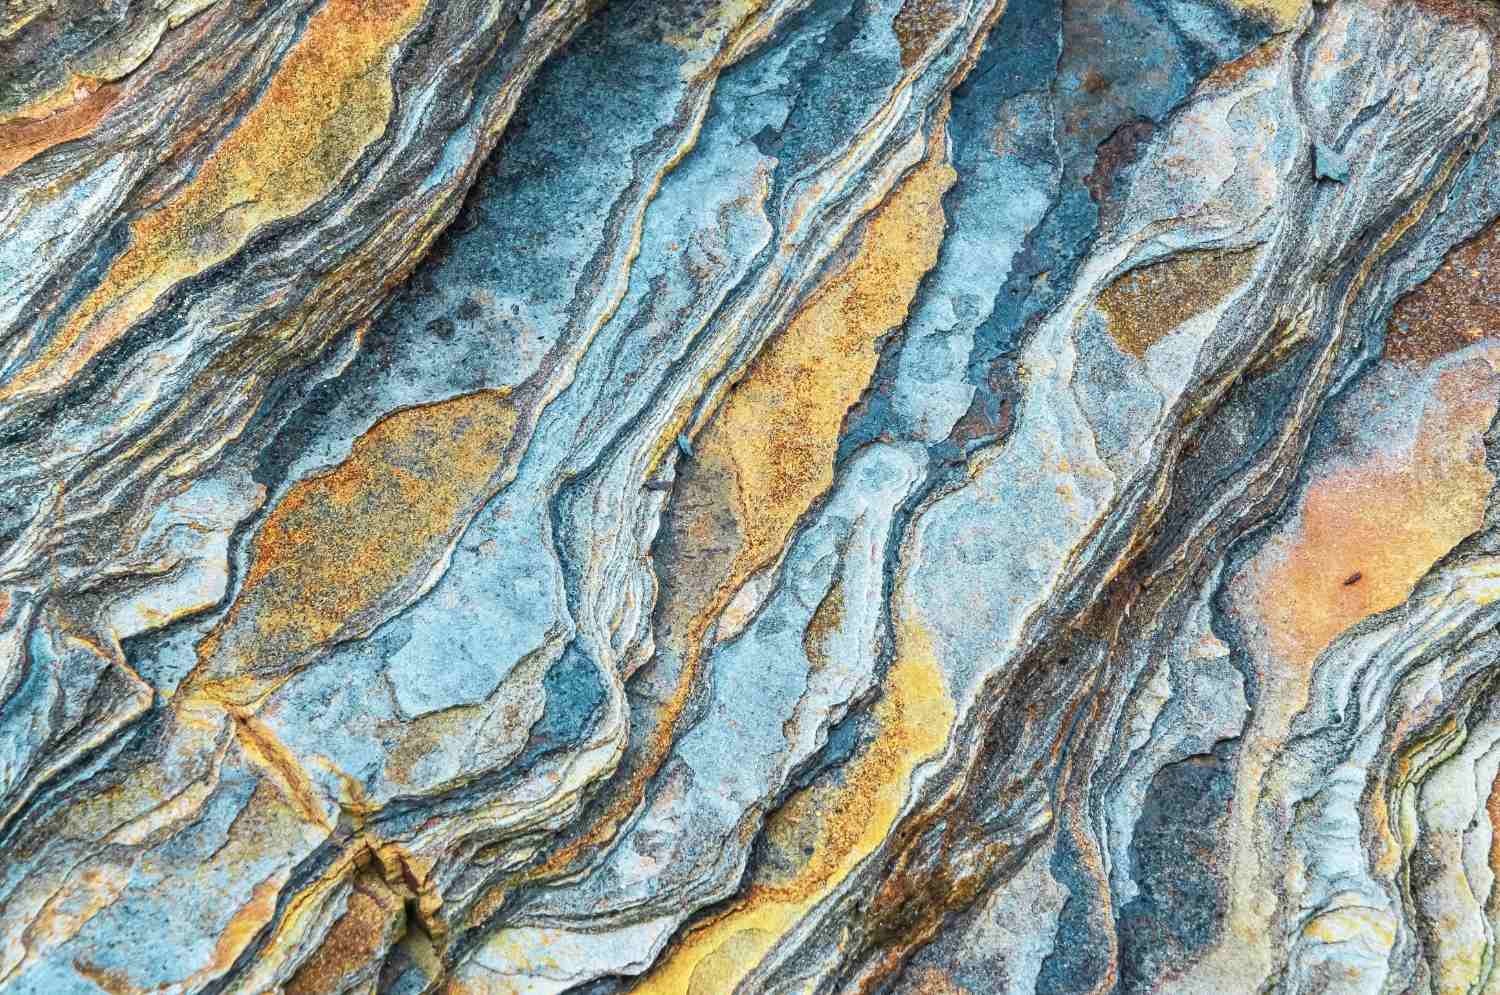 Abstract image of mineral pattern